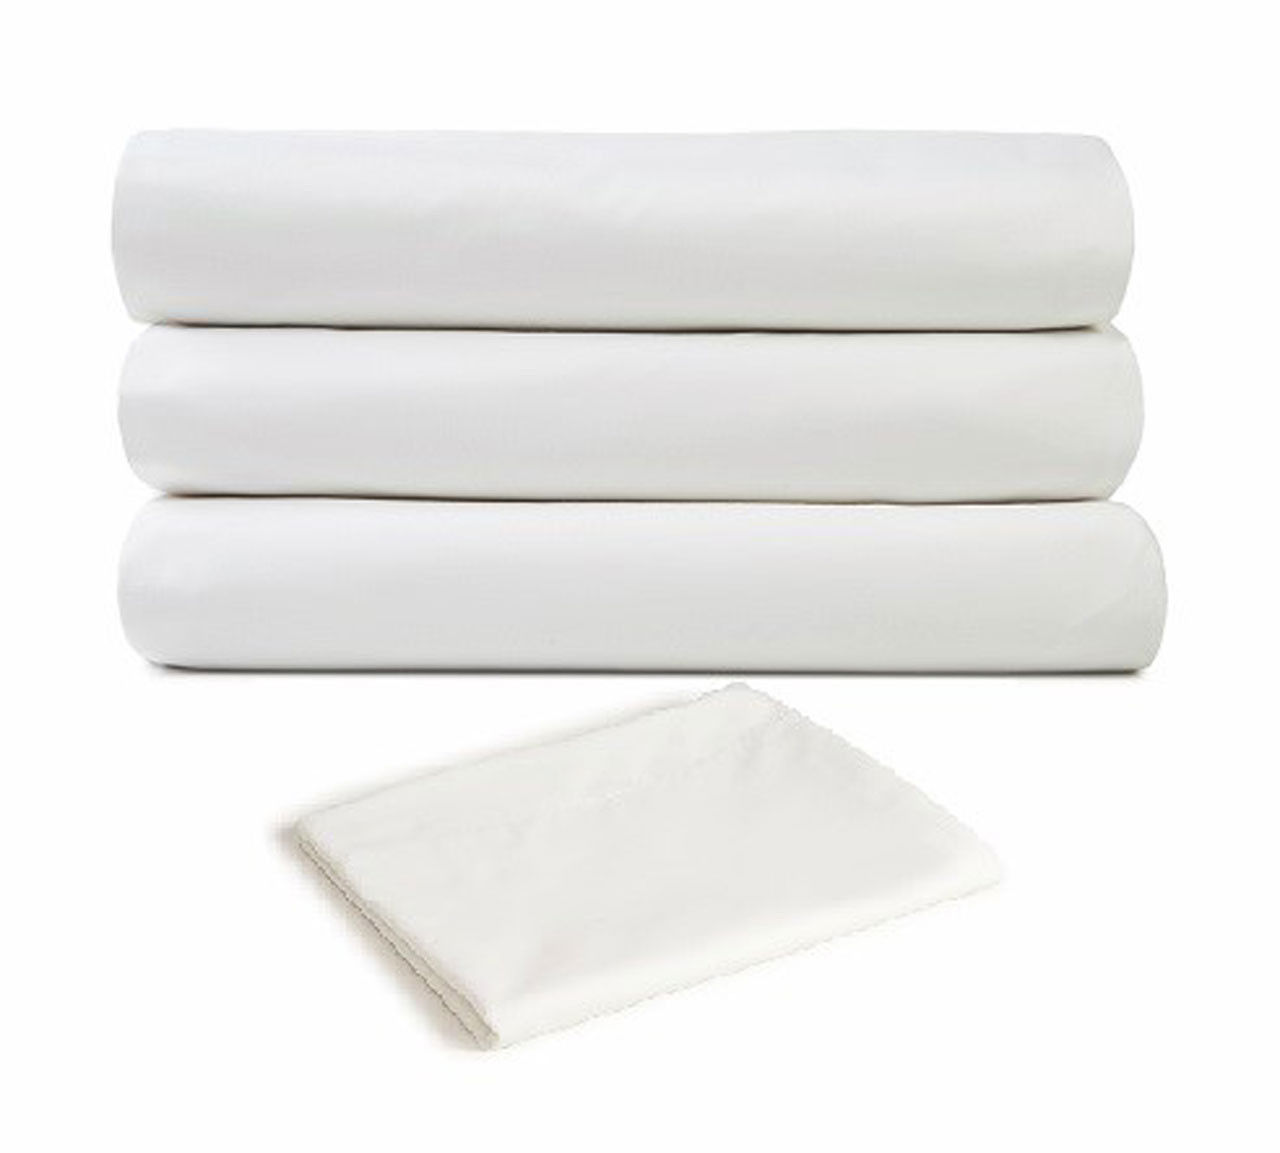 Are polycotton bedsheets good or bad?